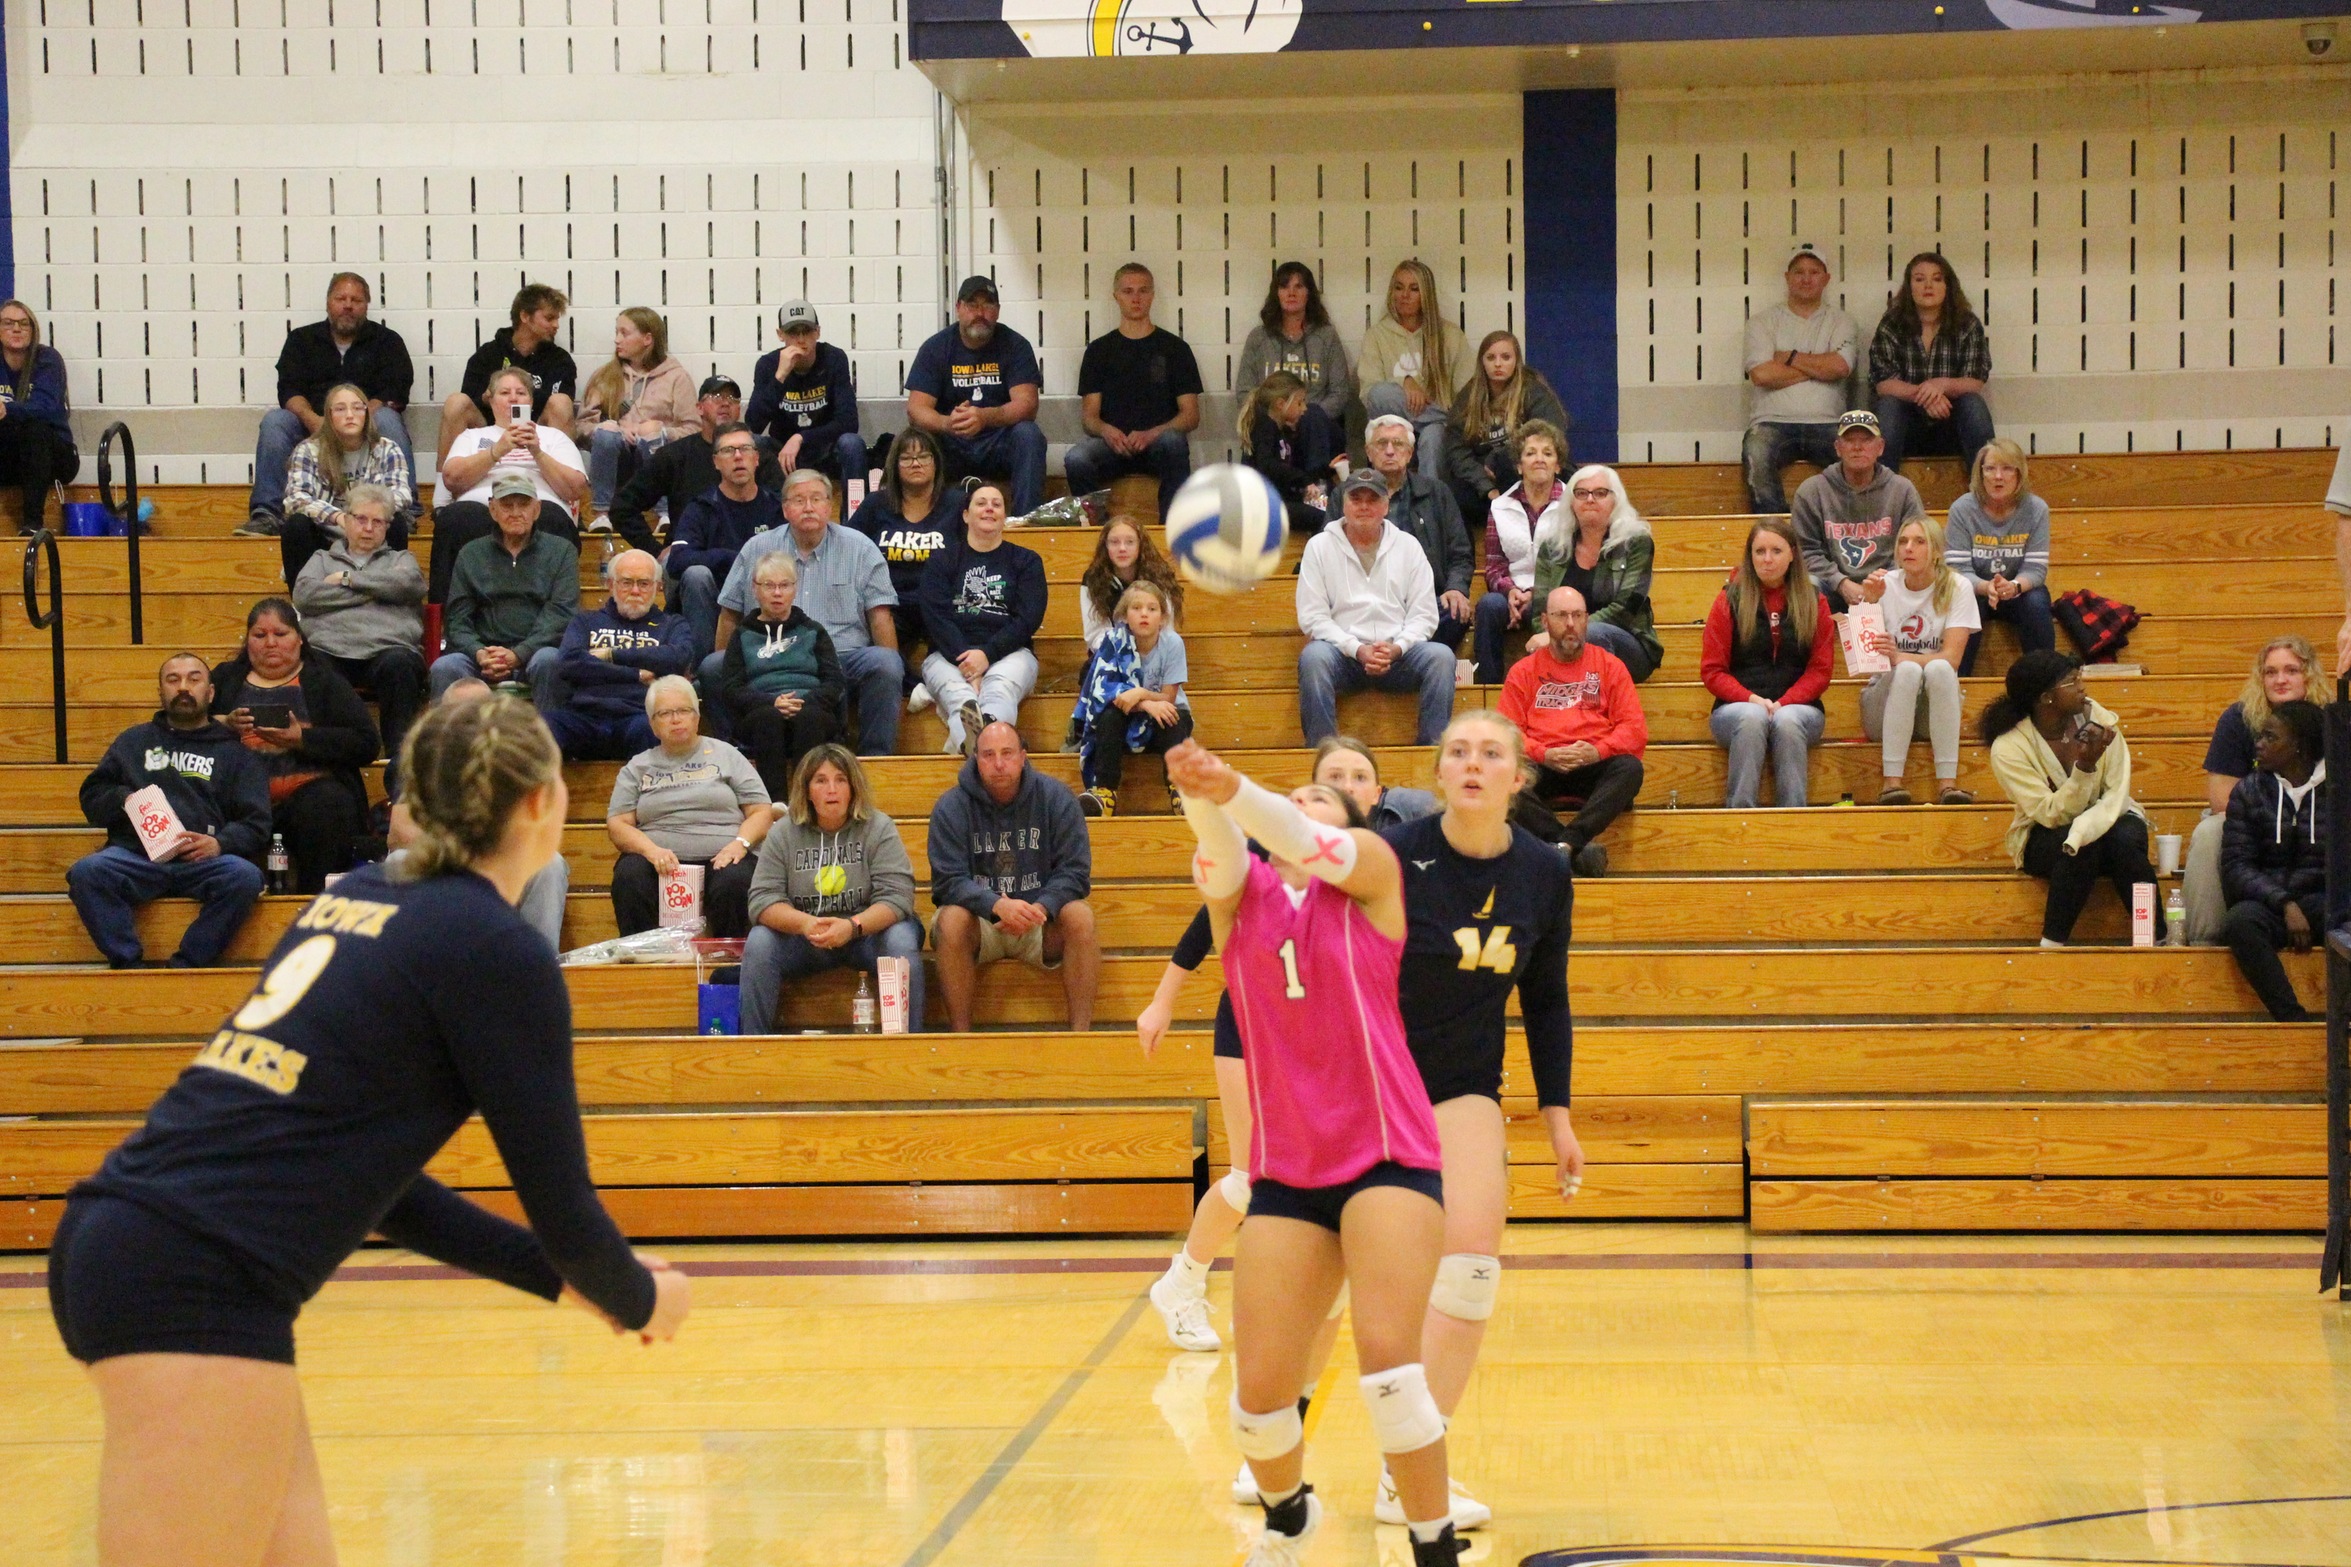 Lakers lose heartbreaker in 4 to NIACC on Unite to Fight night